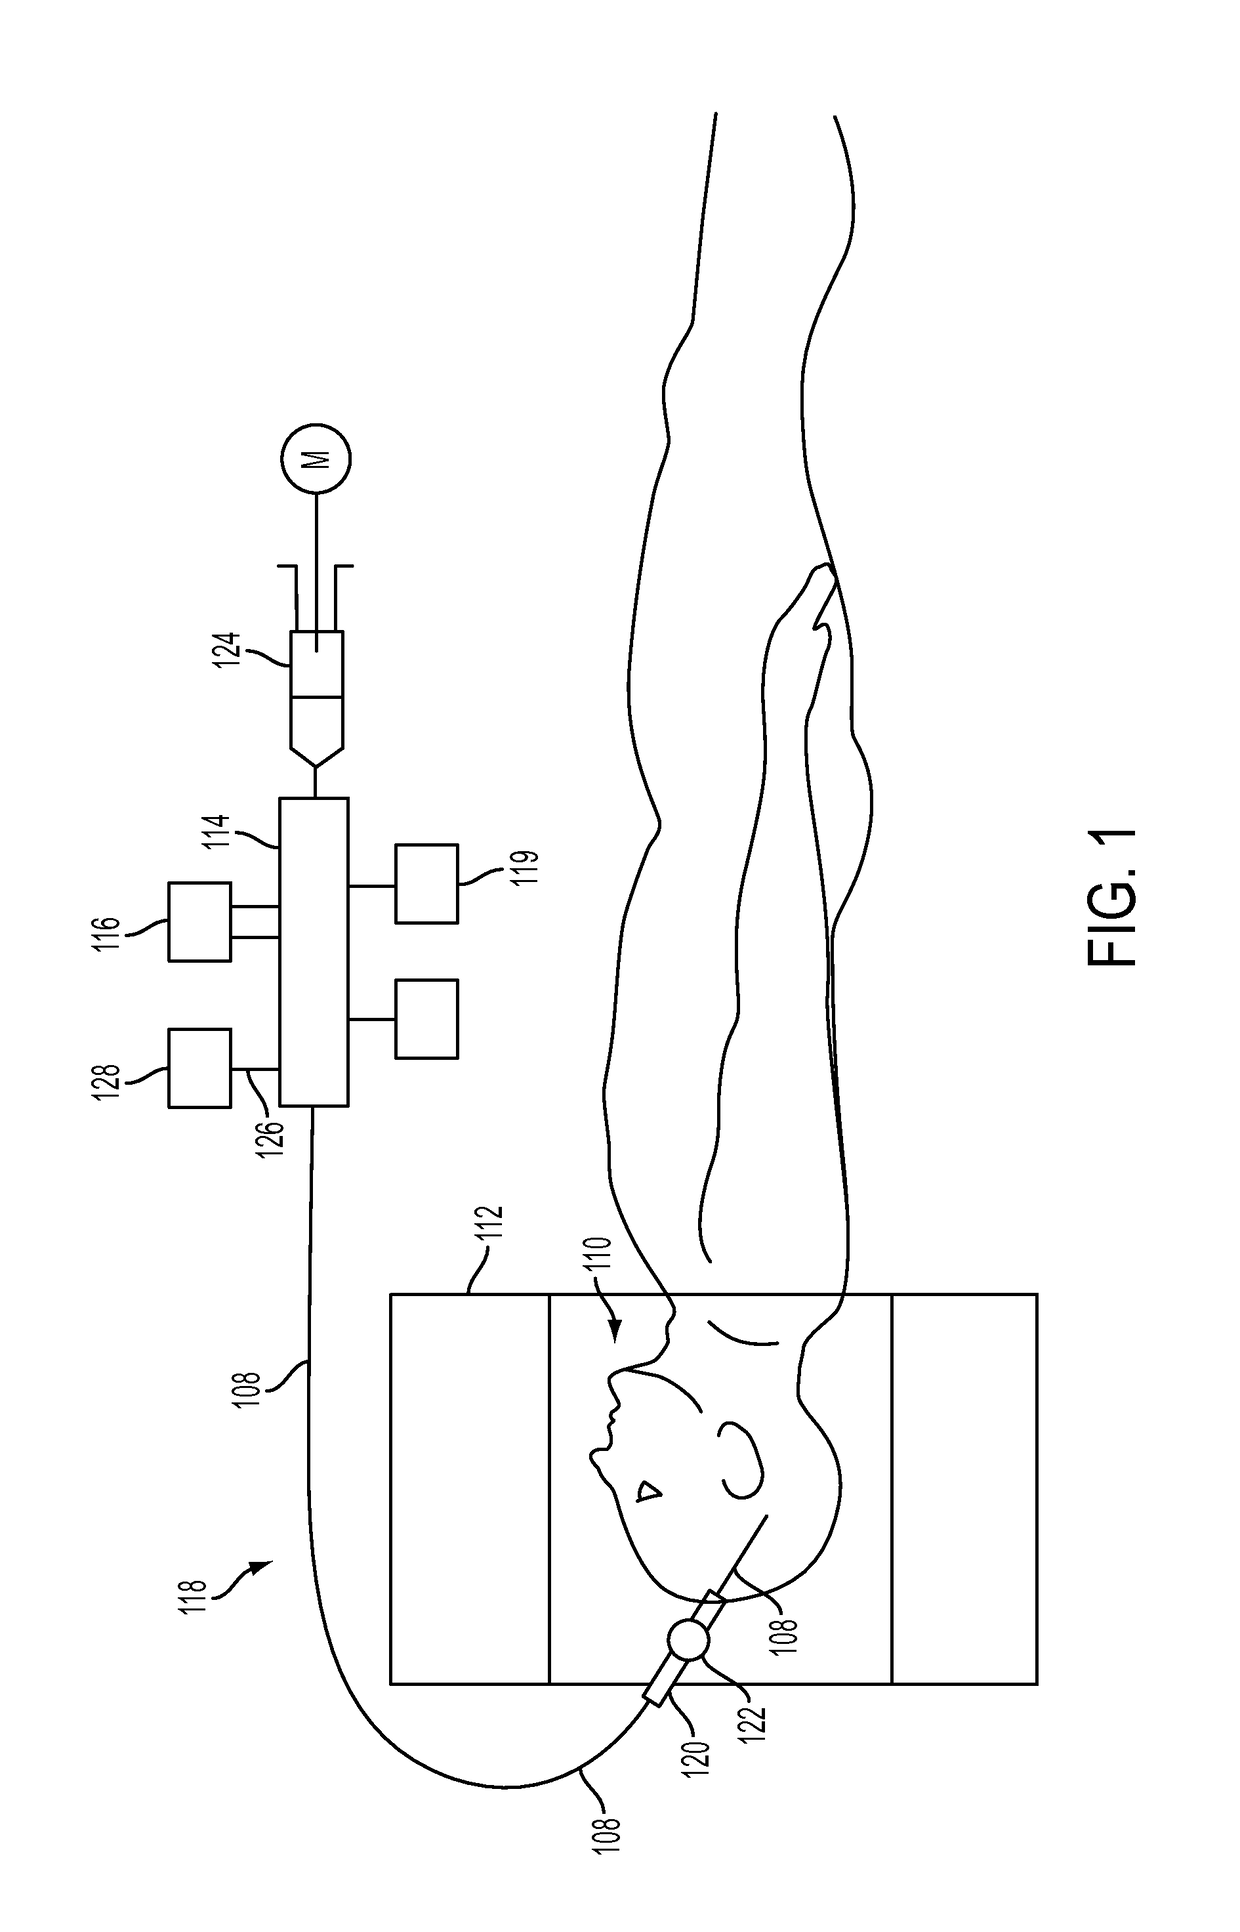 Method and system for enhanced imaging visualization of deep brain anatomy using infusion